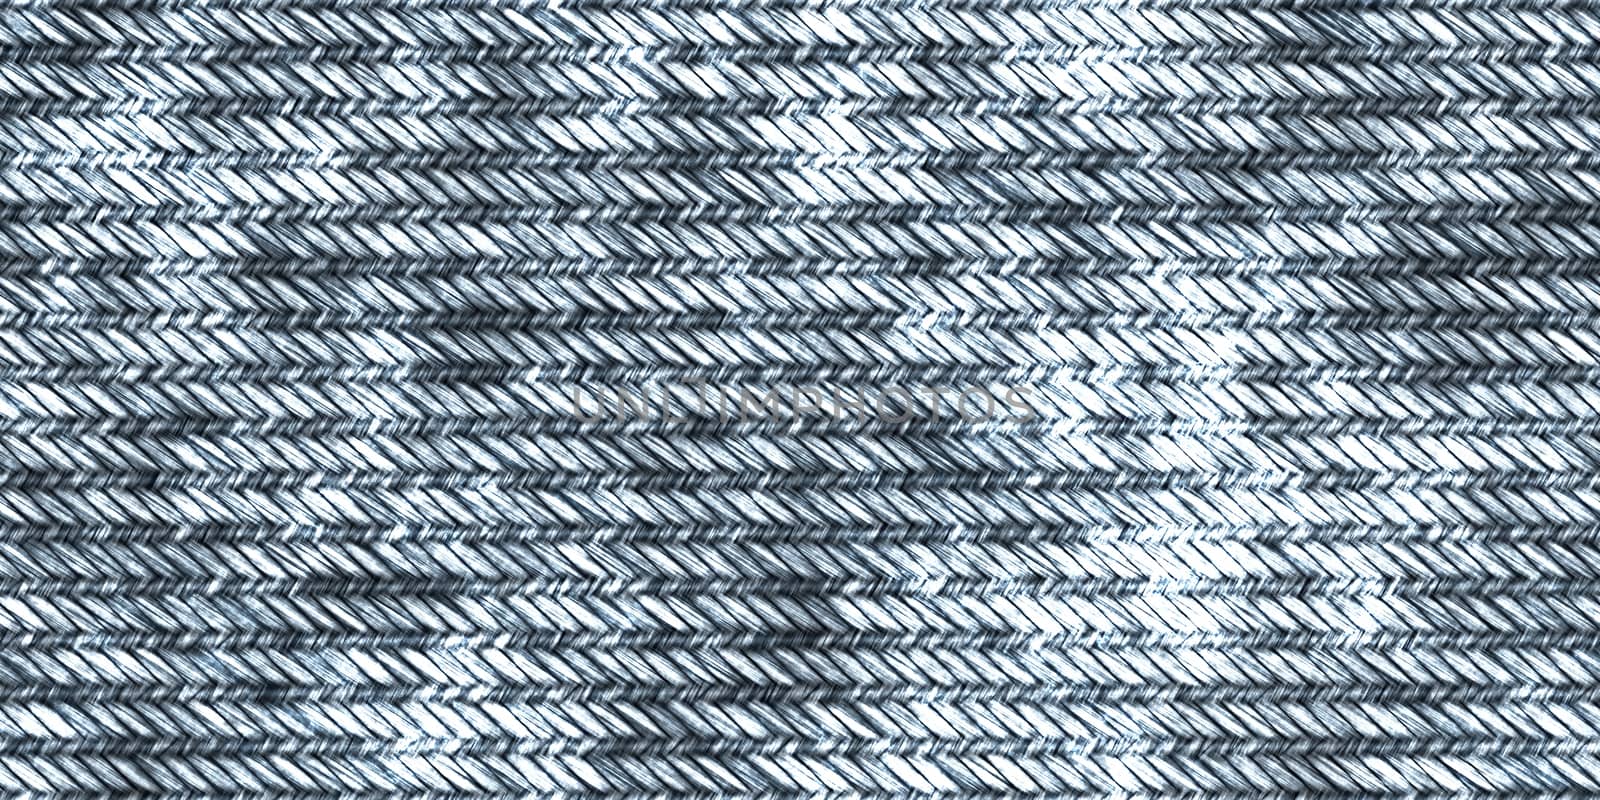 Light Blue Jeans Denim Seamless Textures. Textile Fabric Background. Jeans Clothing Material Surface. Grunge Wear Pattern. by sanches812